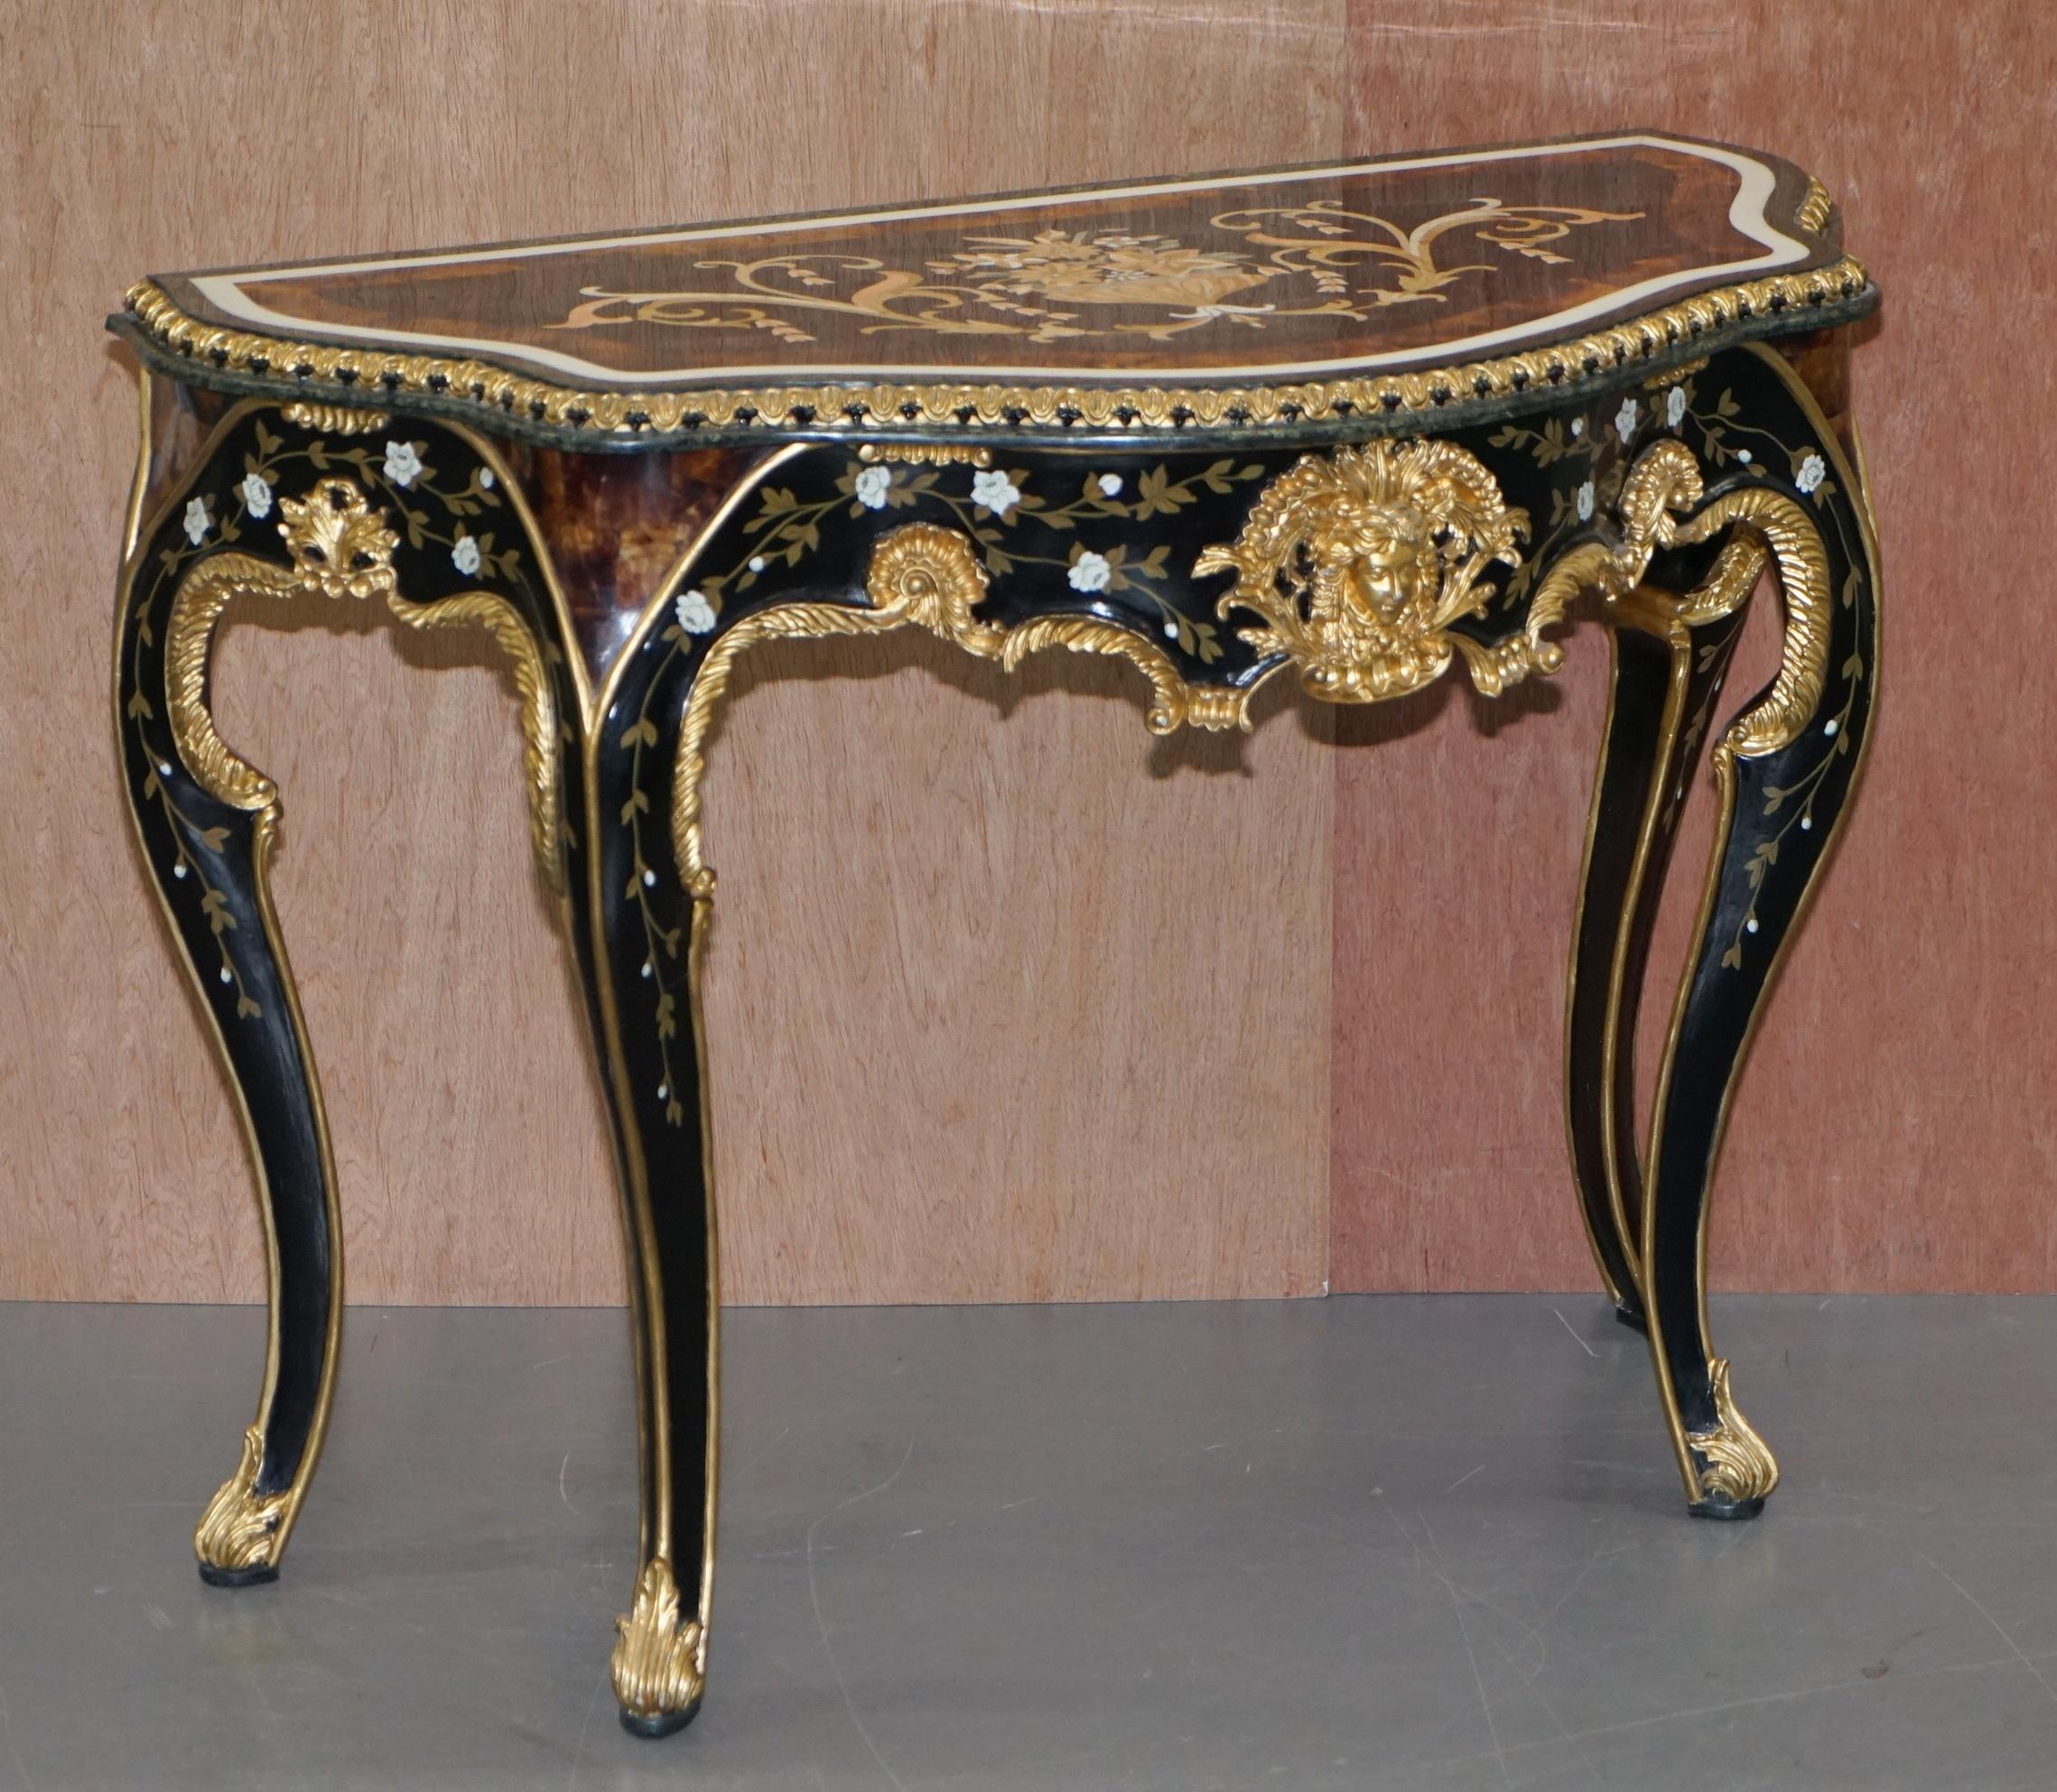 We are delighted to offer for sale this sublime pair of very important vintage Pietra Dura Marble Italian console tables with gold giltwood and bronze detailing

This pair are simply put the most ornate Piertra Dura pieces I have ever seen, they